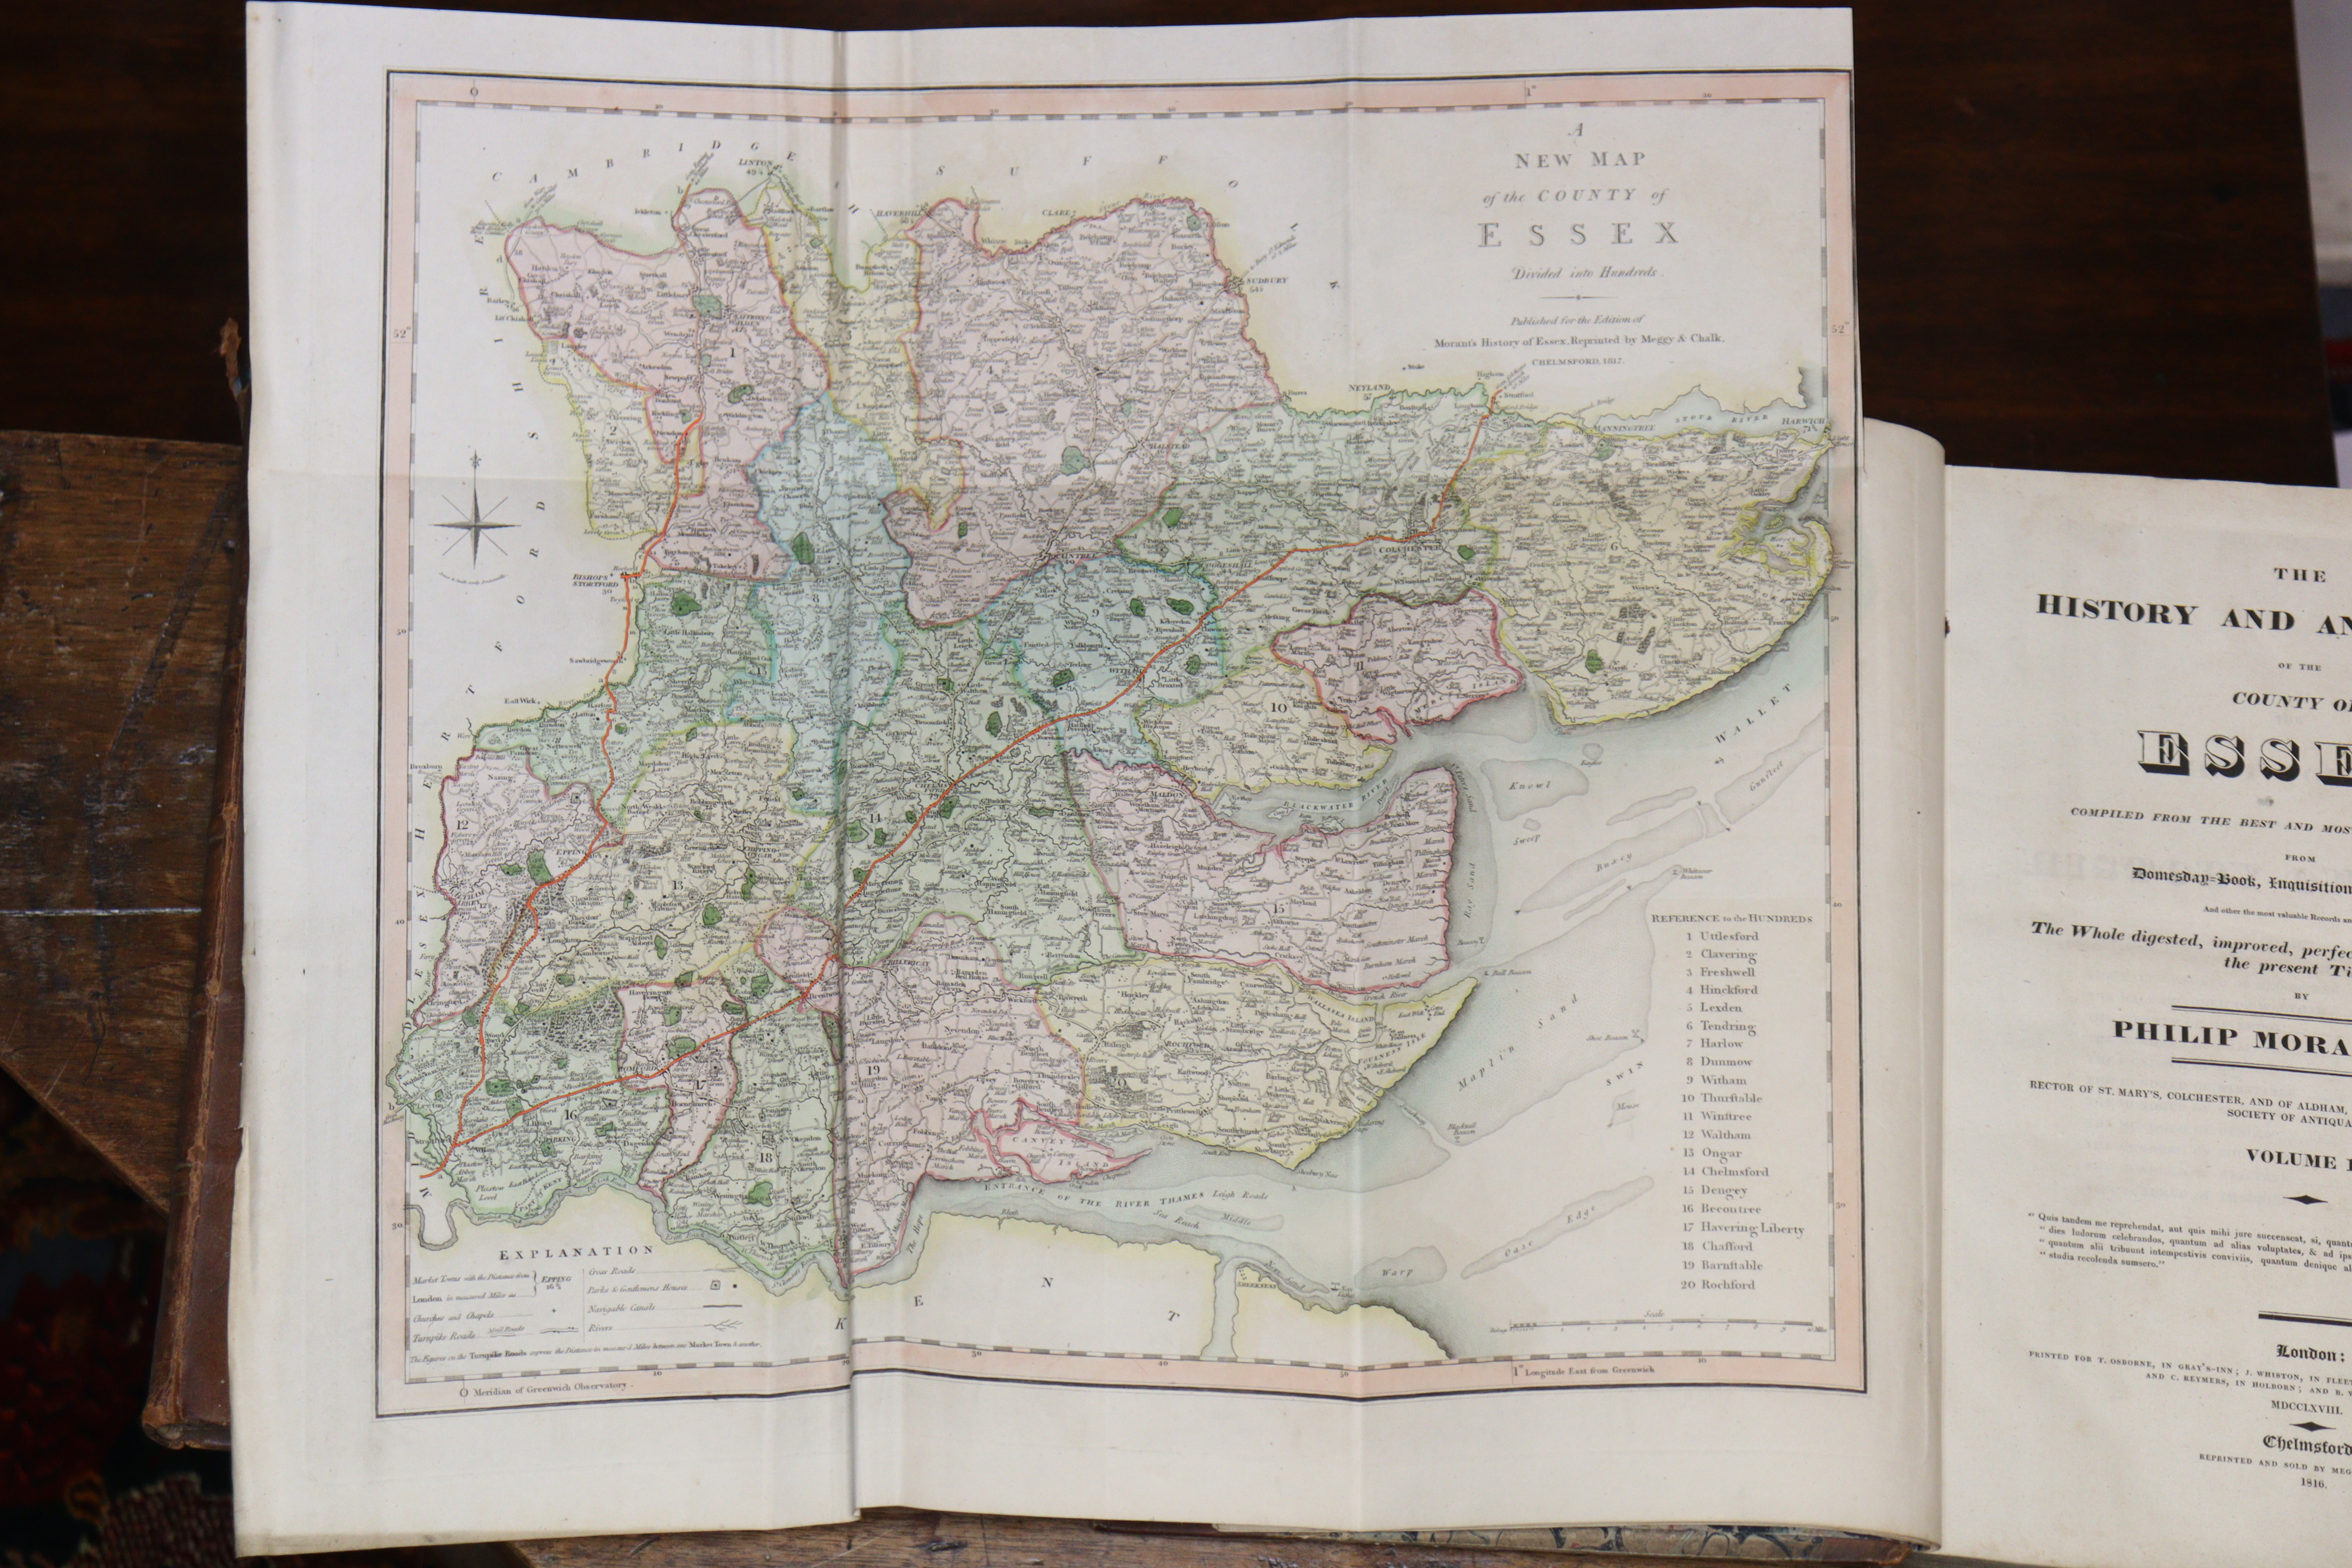 MORANT, Philip, “The History and Antiquities of the Country of Essex”, 2 vols, published 1816 by T. - Image 3 of 3